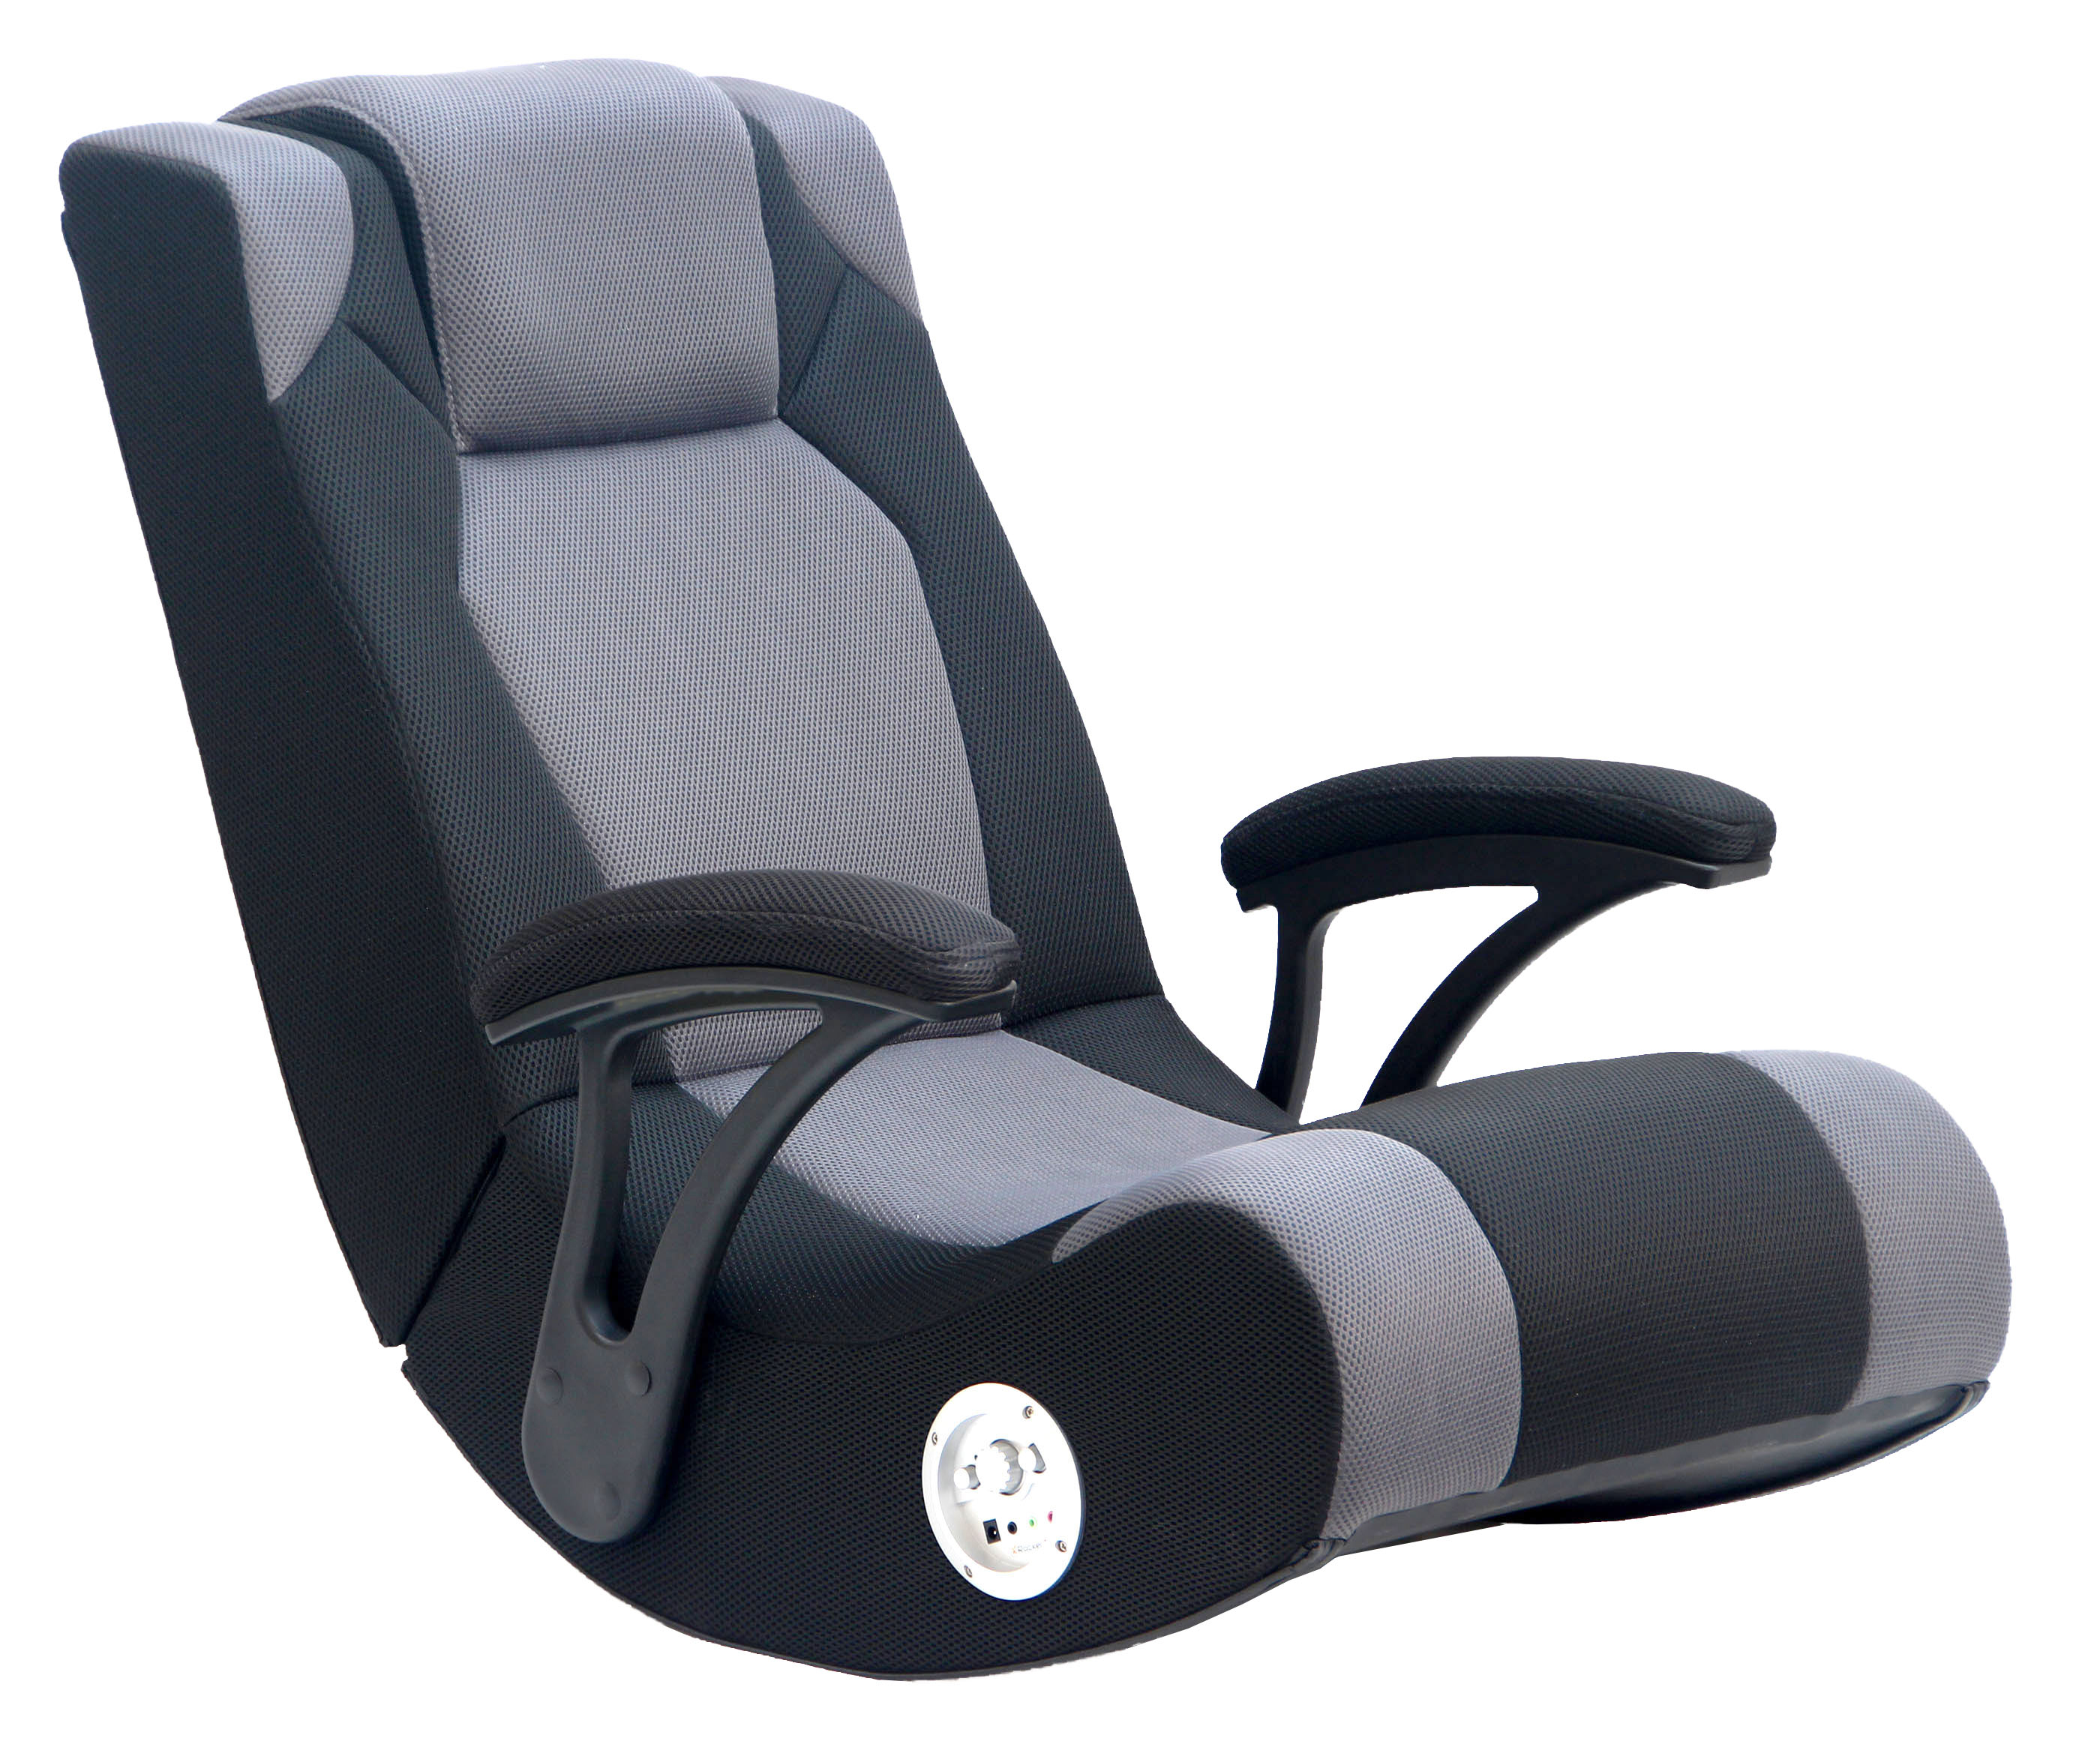 X Rocker Pro 200 Gaming Chair Rocker with Sound Enhancement Features - image 1 of 7